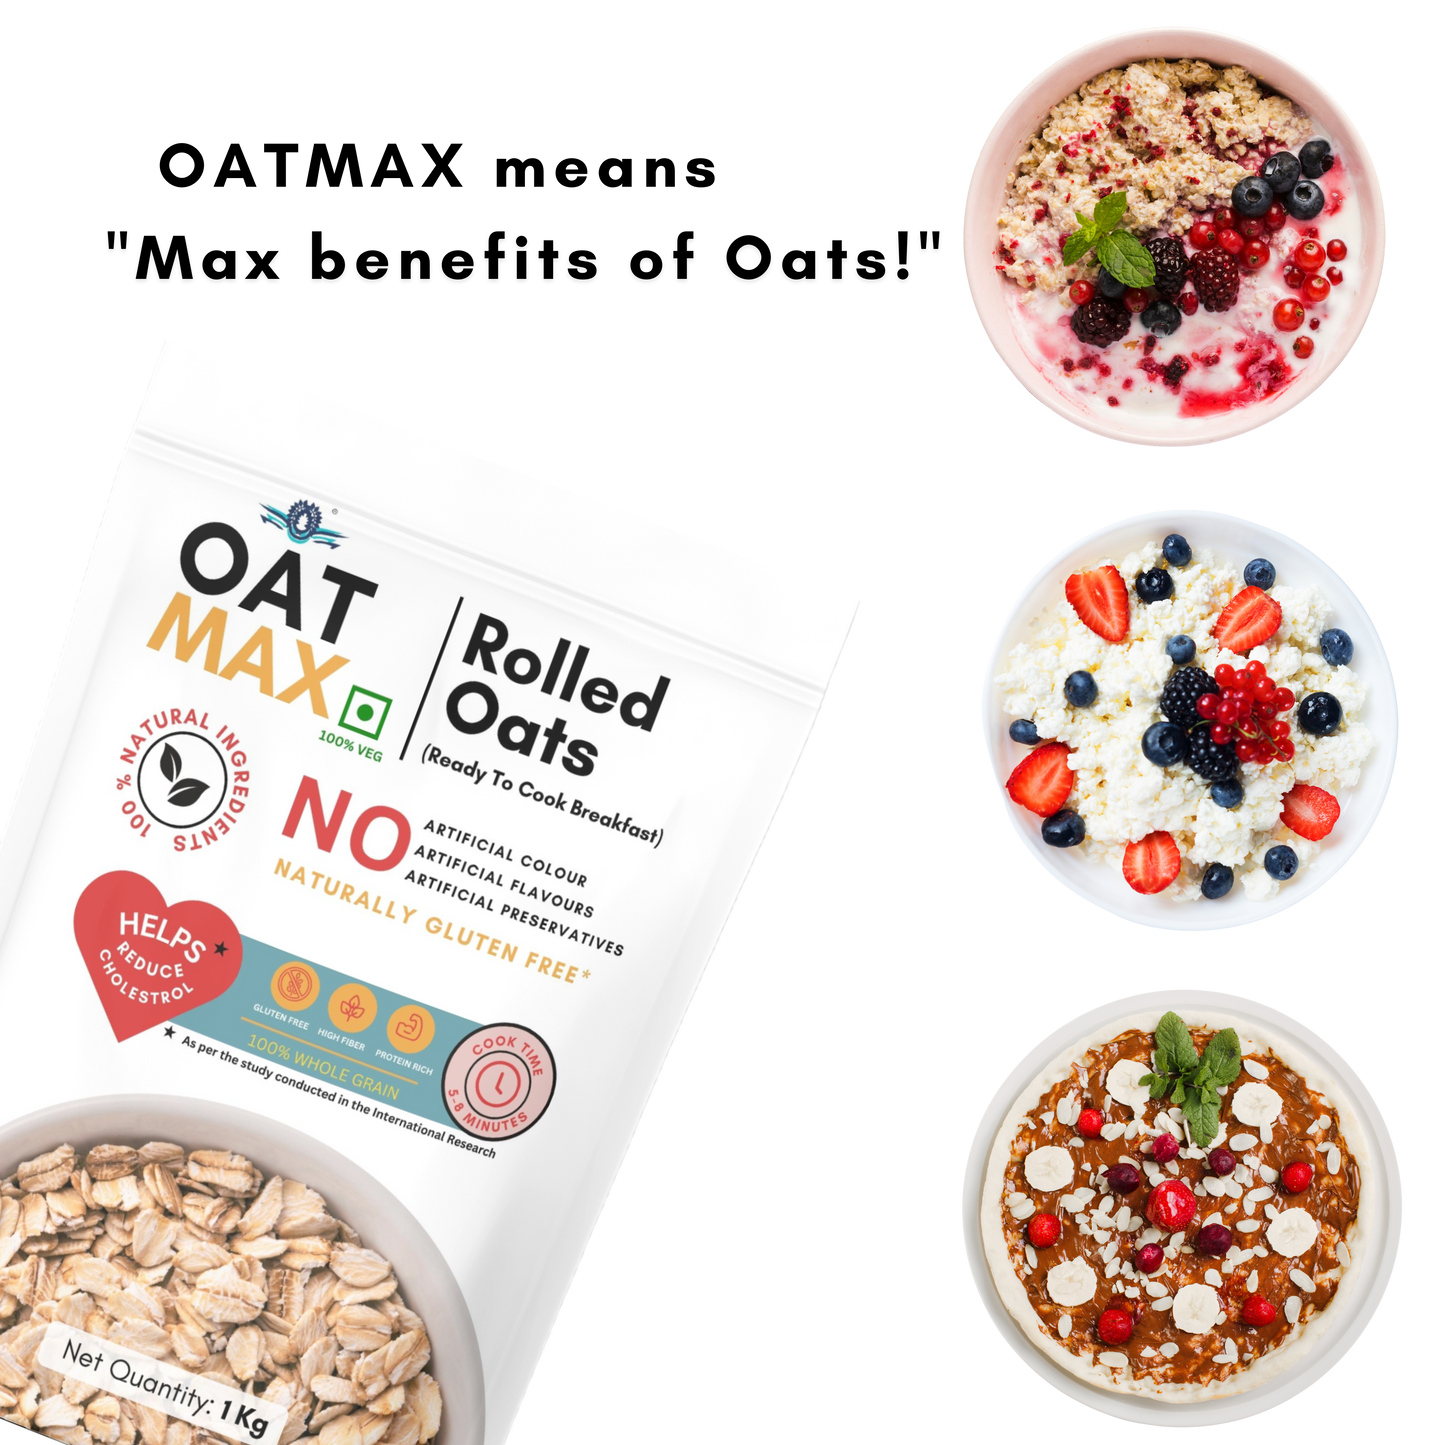 OATMAX Rolled Oats|100% Natural and Gluten Free Oats | High in Protein & Fibre | Healthy Breakfast Cereals | Oats for Weight Loss Management